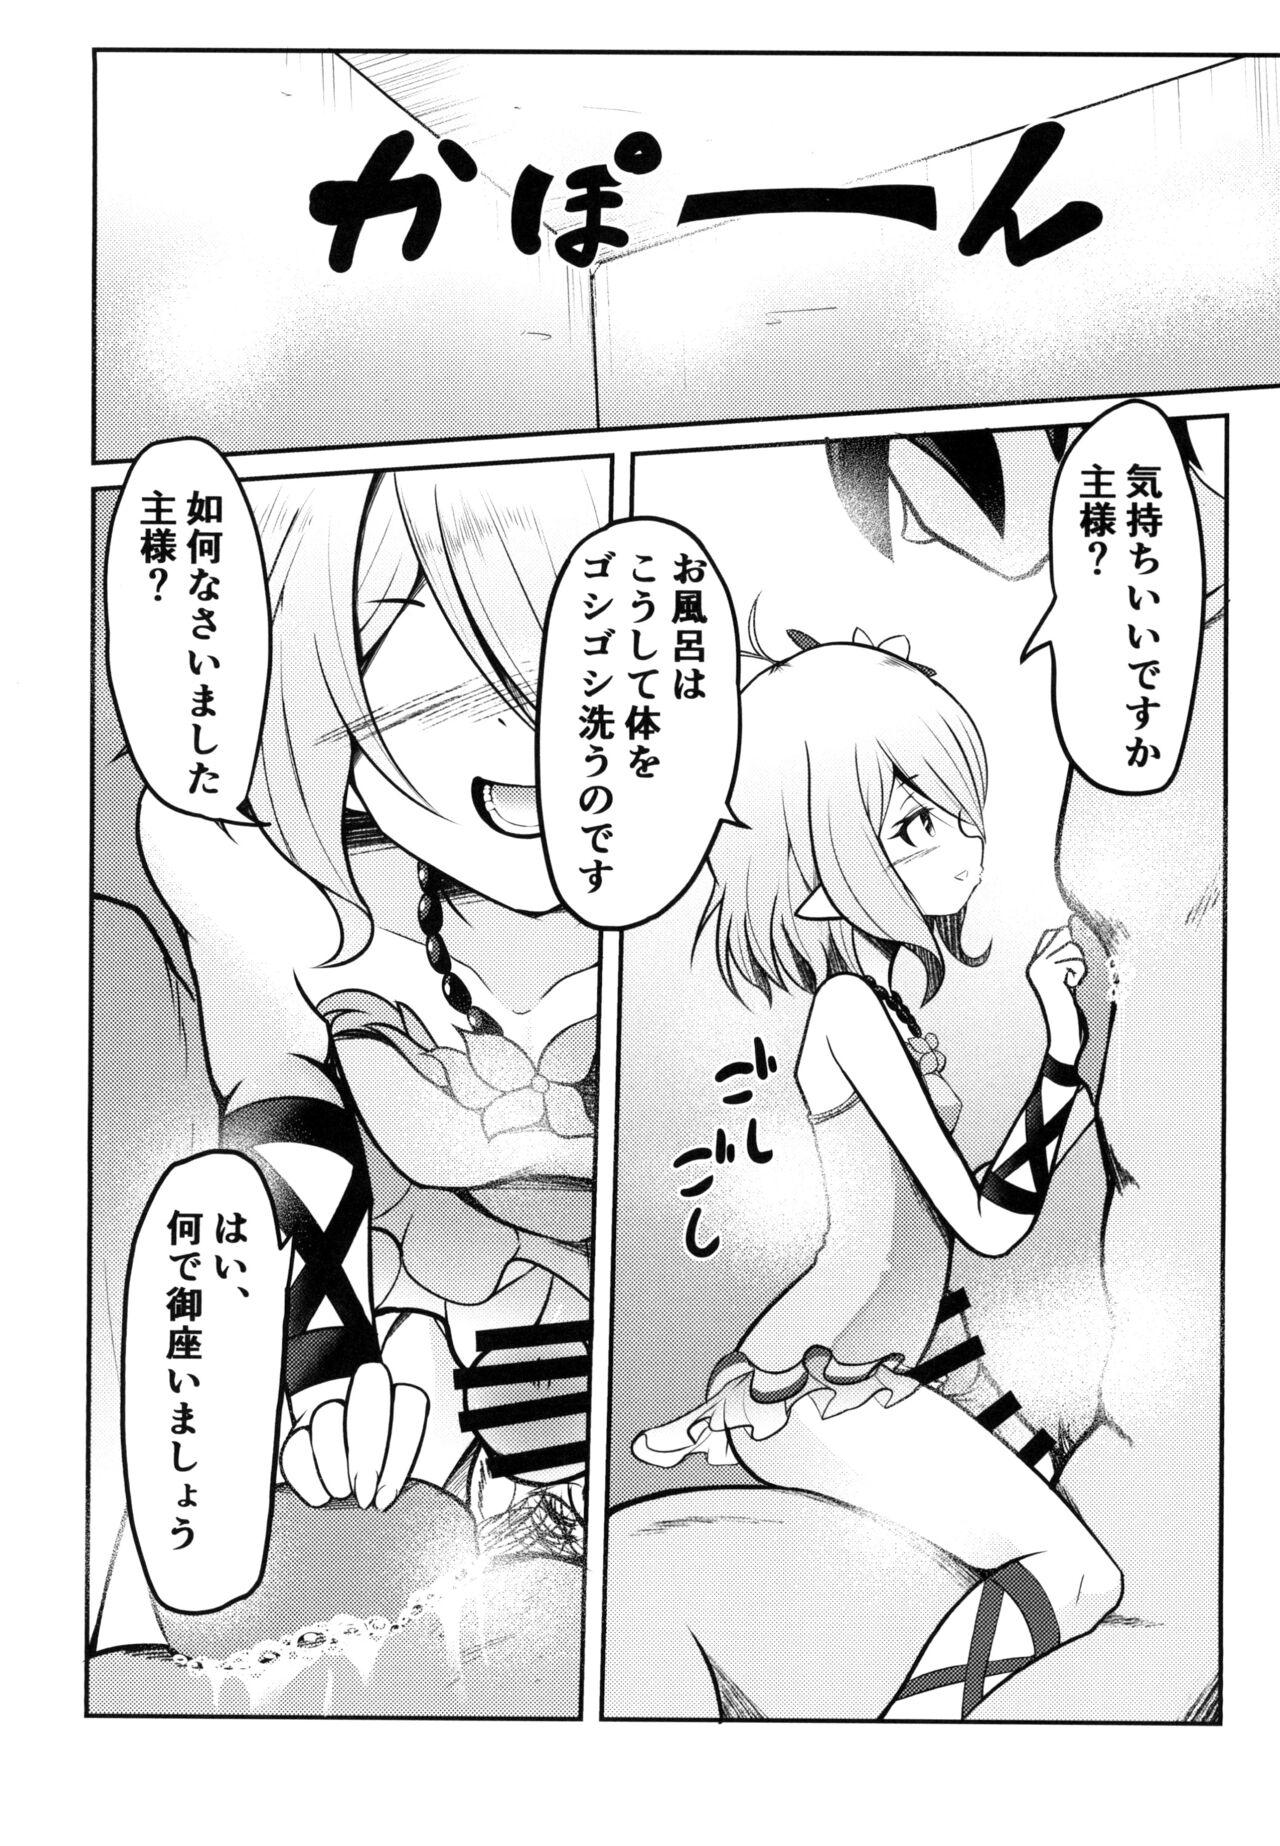 Master おべんきょしましょう主様!! - Princess connect Stripping - Page 4